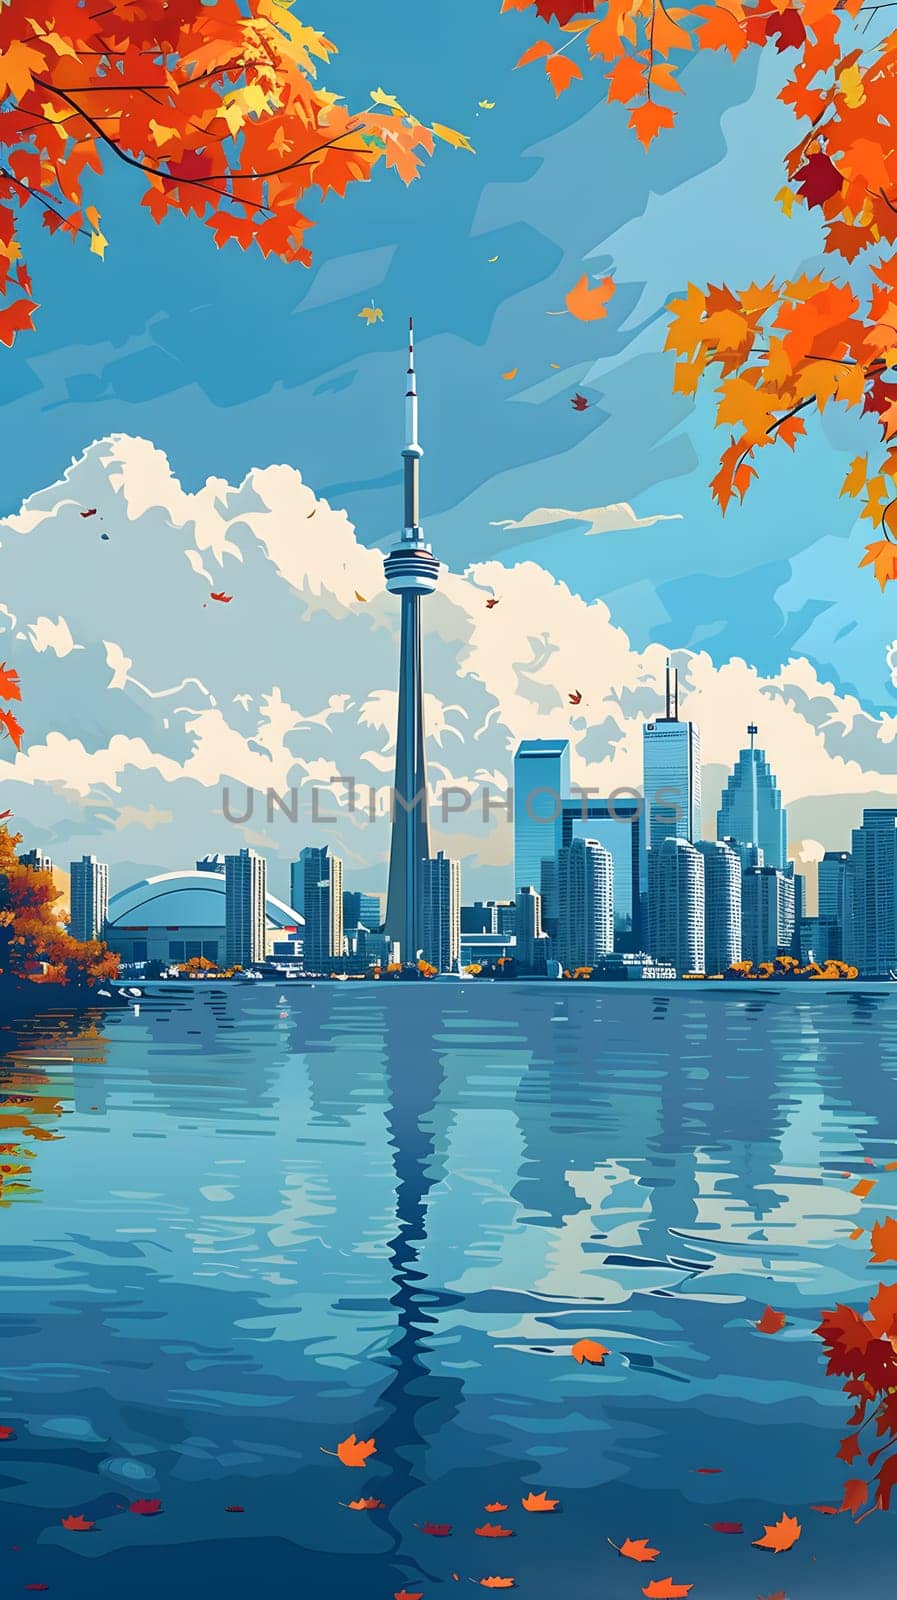 A city skyline painting featuring a serene lake in the foreground under a clear daytime sky. Skyscrapers, towers, and plants dot the urban landscape, creating a harmonious atmosphere